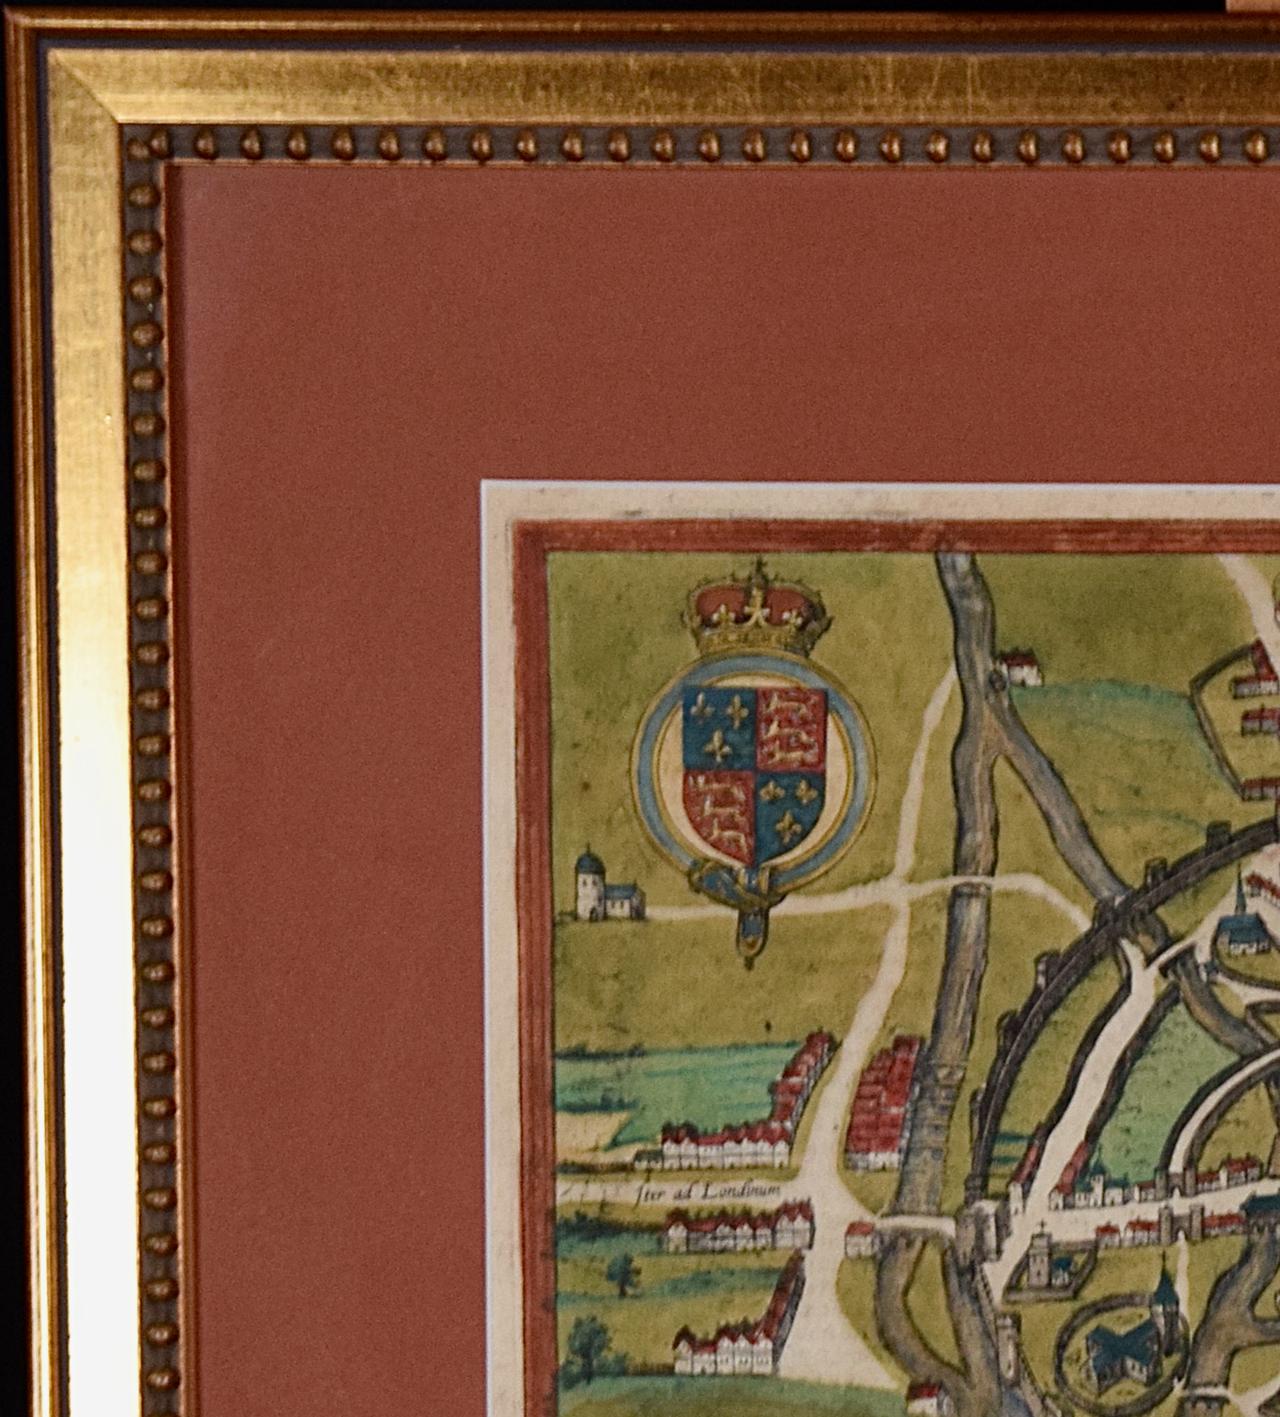 Canterbury: An Original 16th C. Framed Hand-colored Map by Braun & Hogenberg For Sale 1